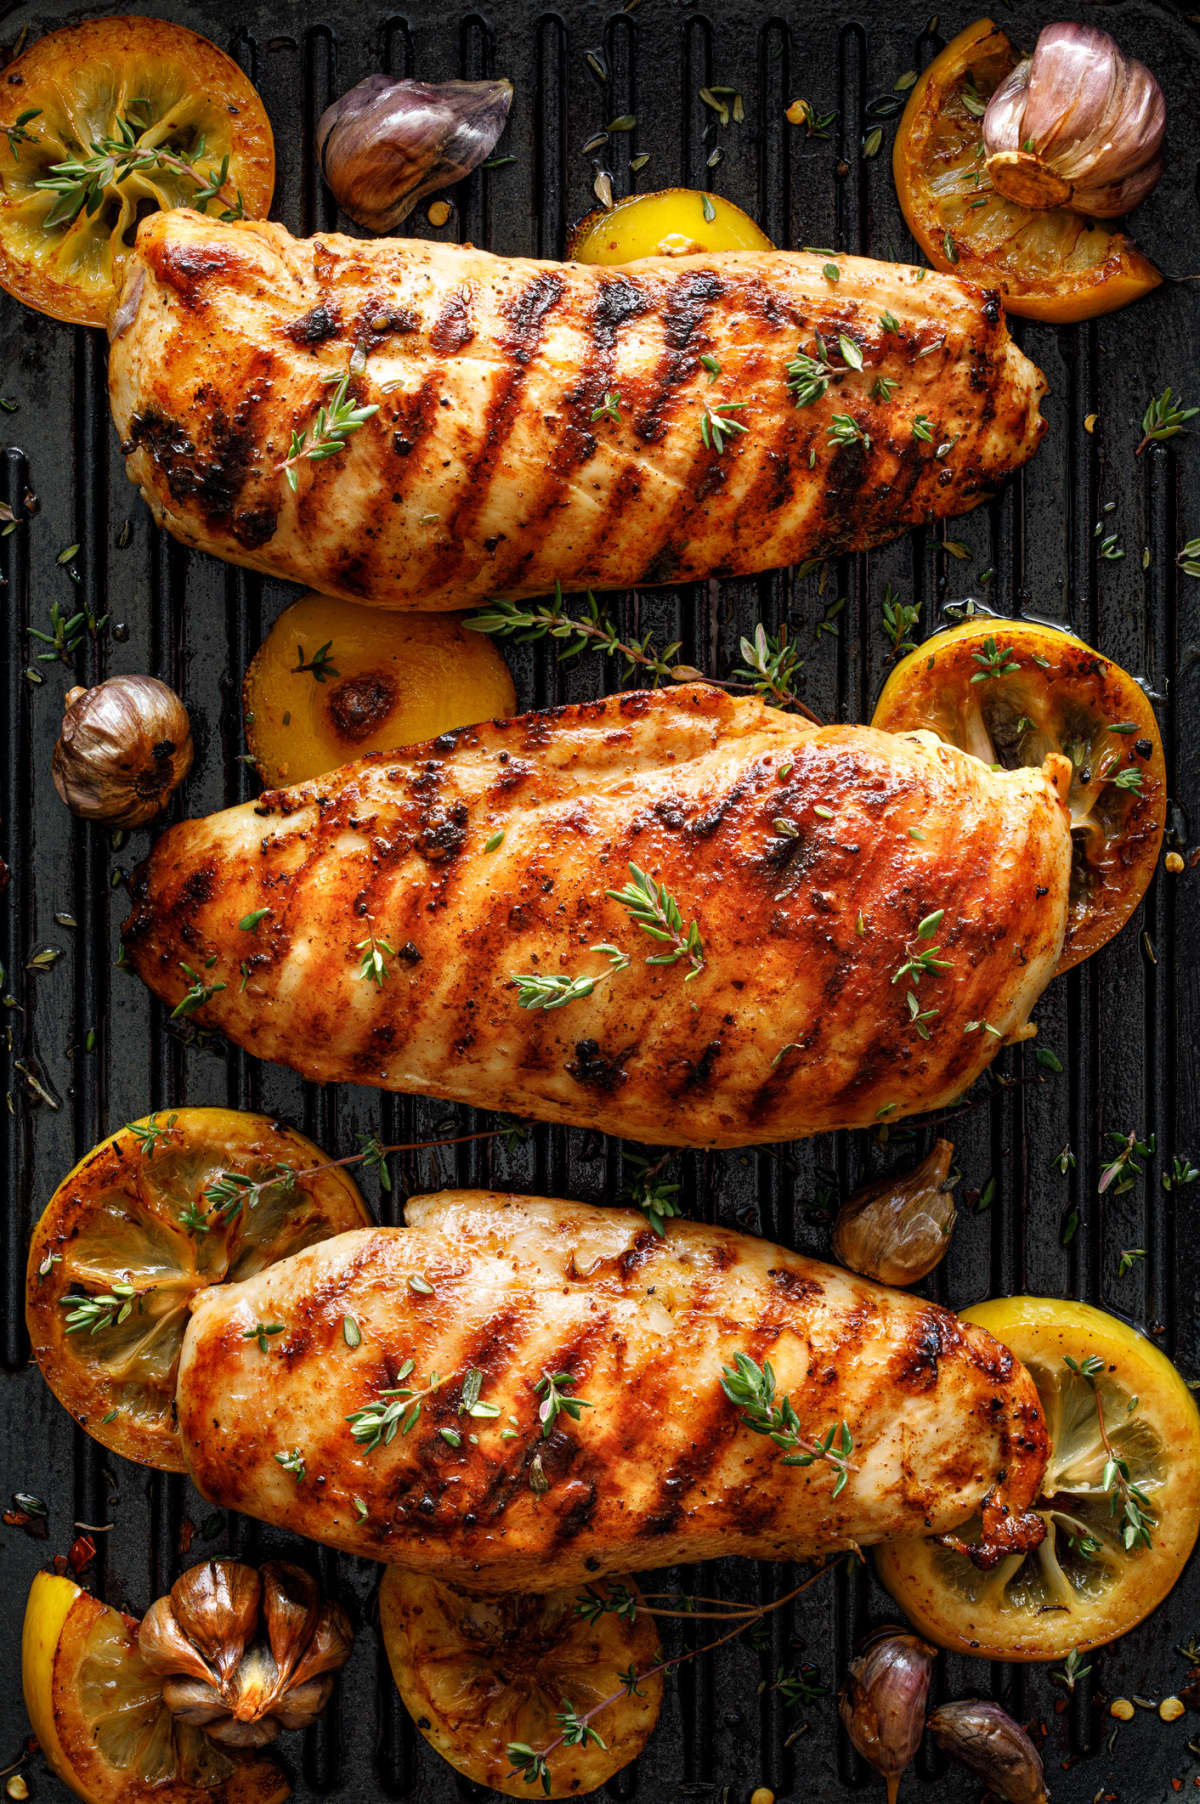 Grilled chicken breasts with thyme, garlic and lemon slices on a grill pan